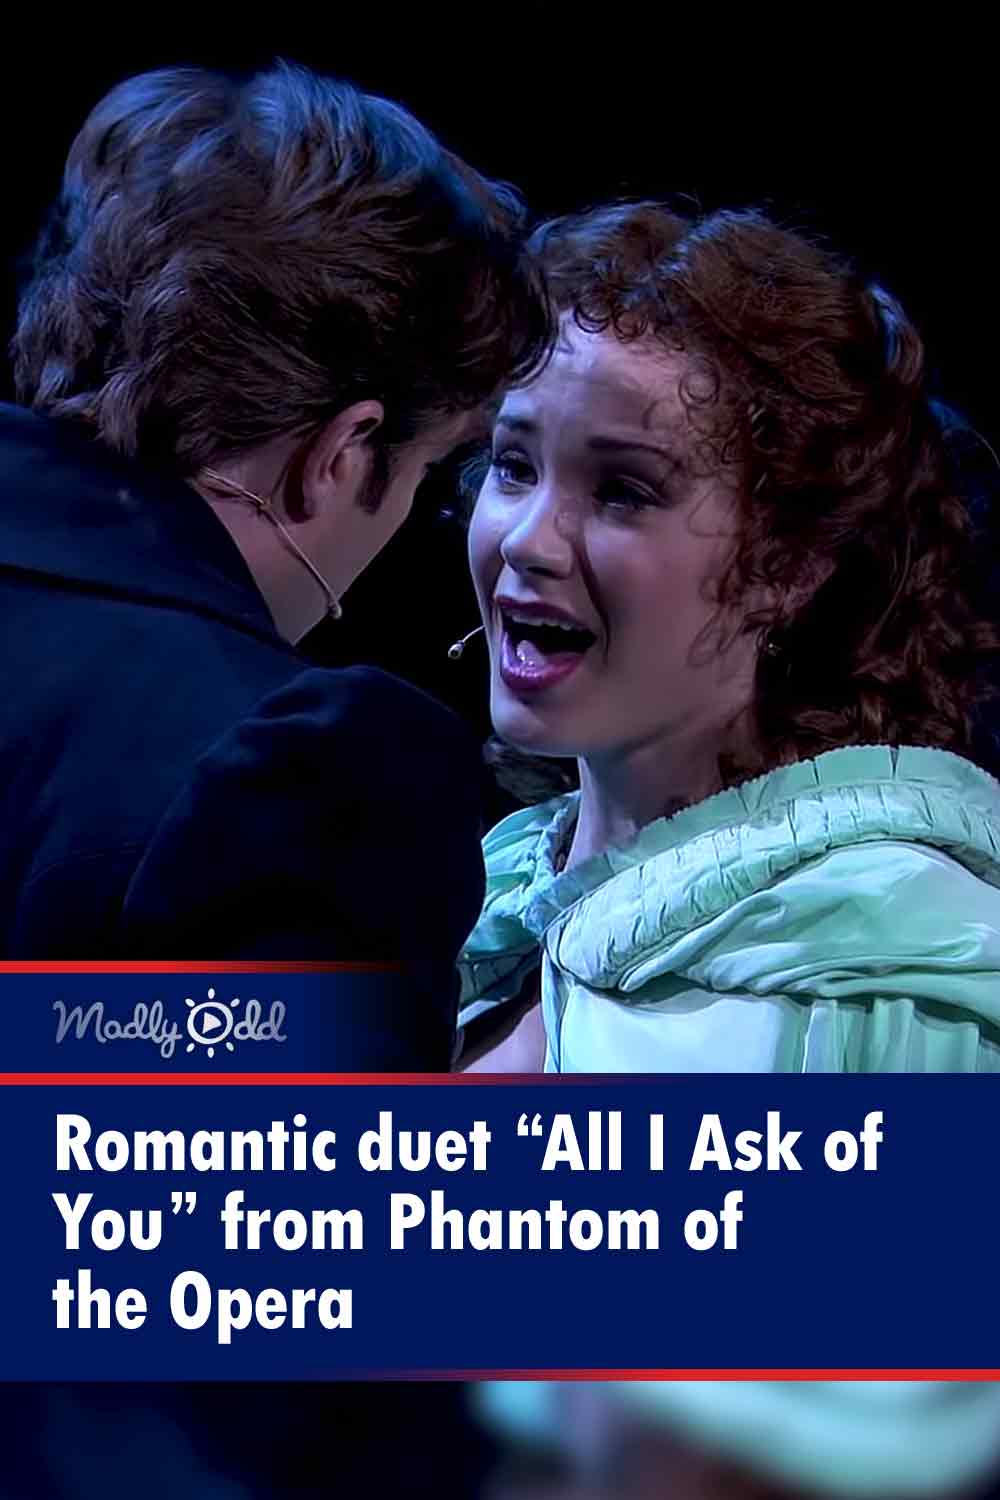 Romantic duet “All I Ask of You” from Phantom of the Opera